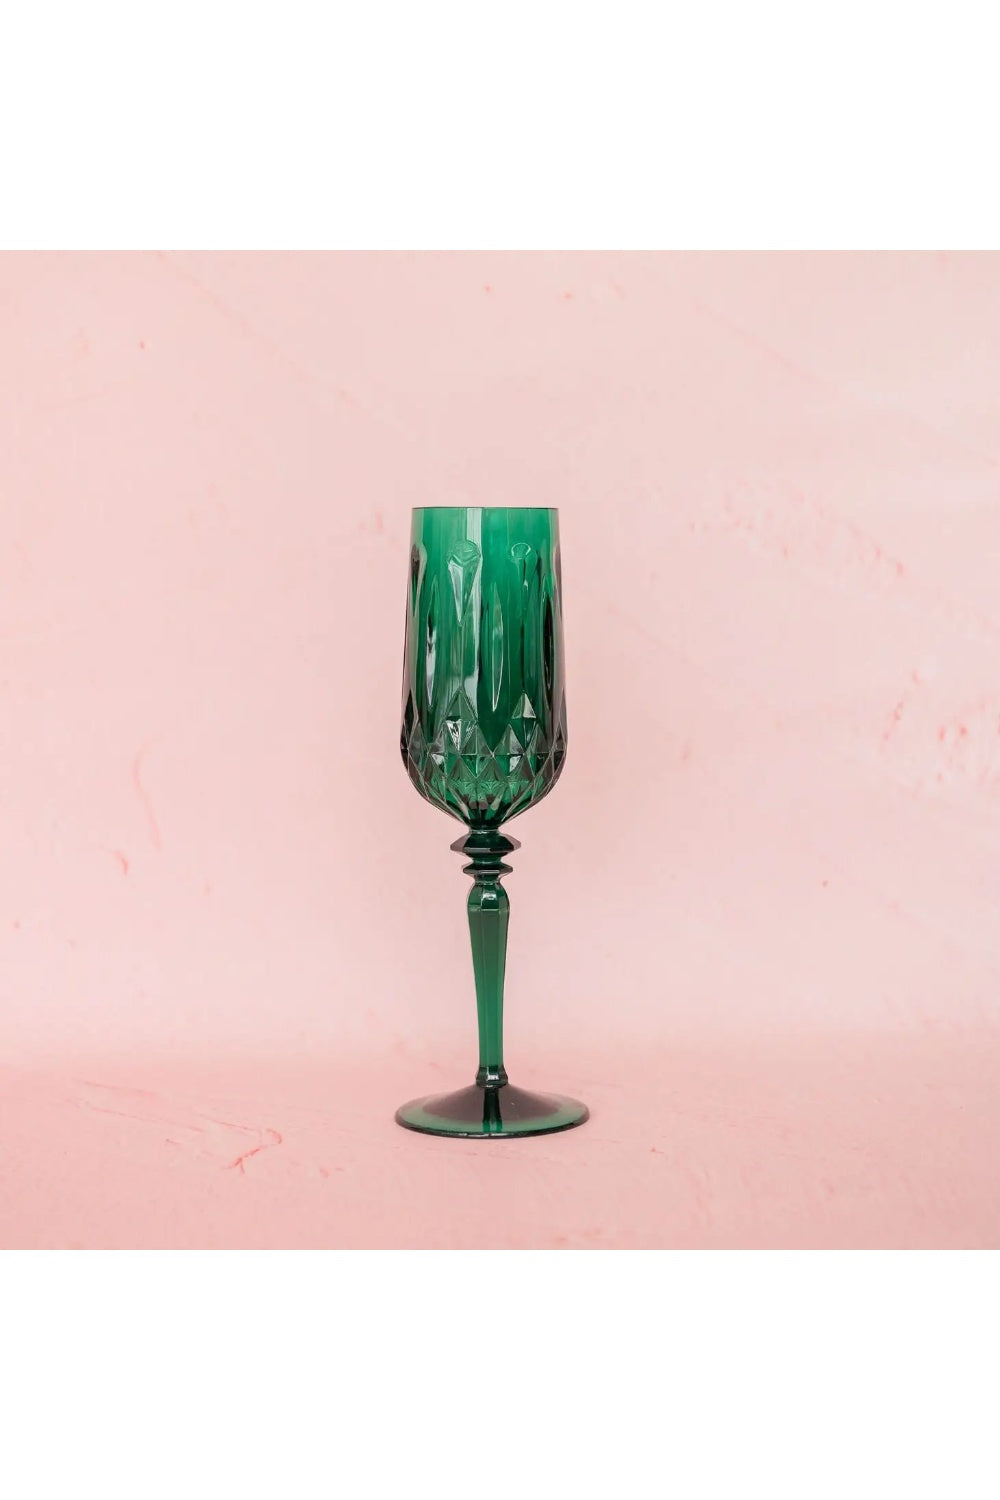 SET OF FOUR CHAMPAGNE FLUTES LUCKY EMERALD